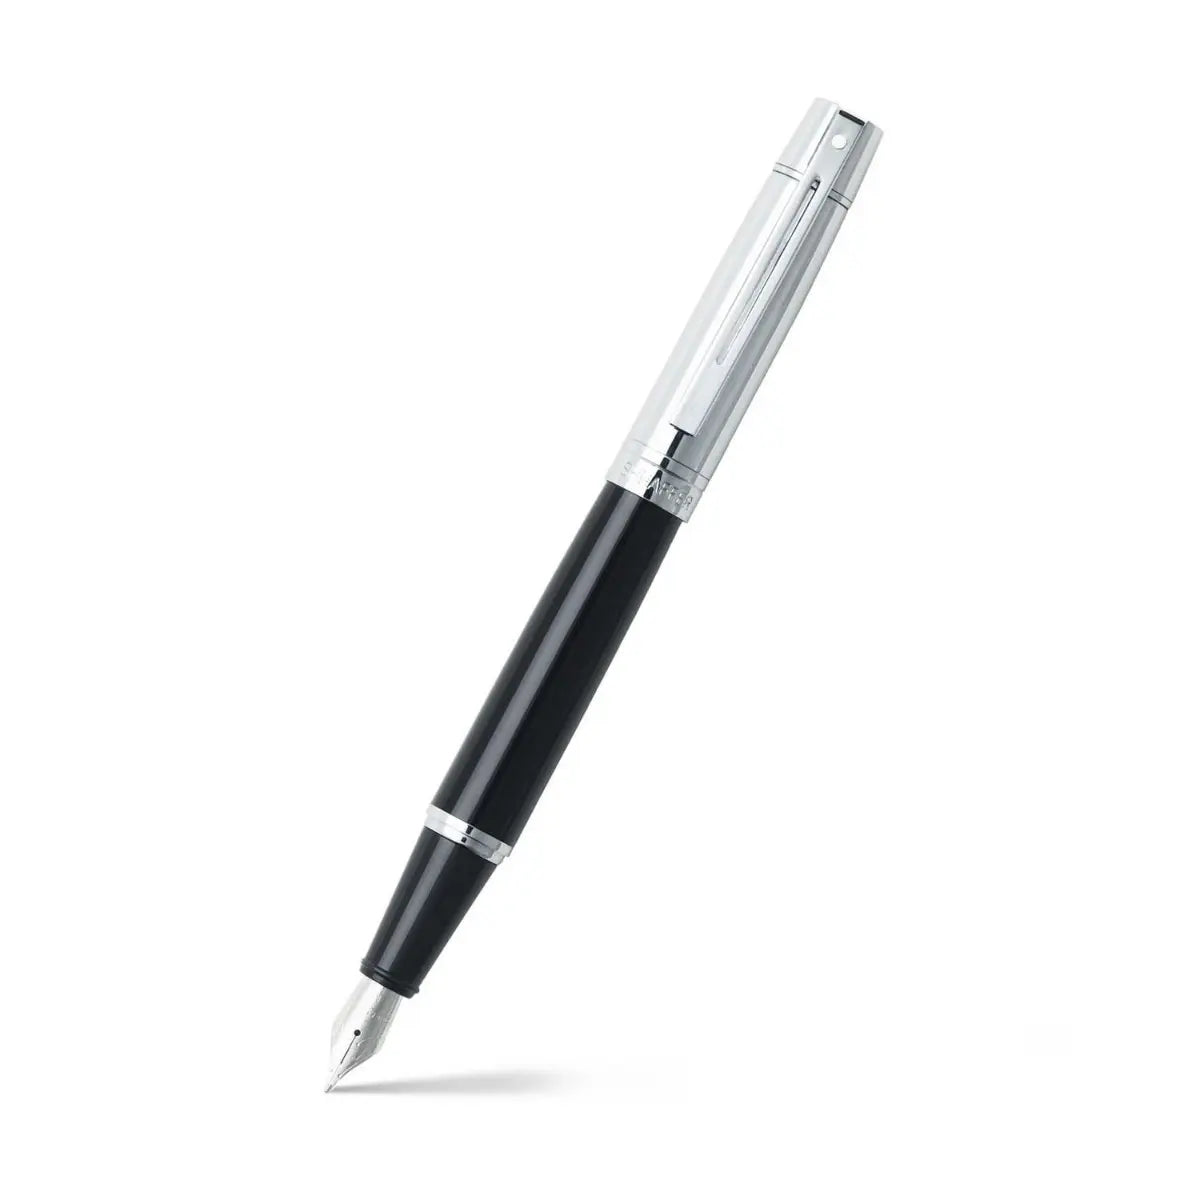 A black Sheaffer® 300 Black and Chrome Fountain Pen With Chrome Trims - Fine pen on a white background.